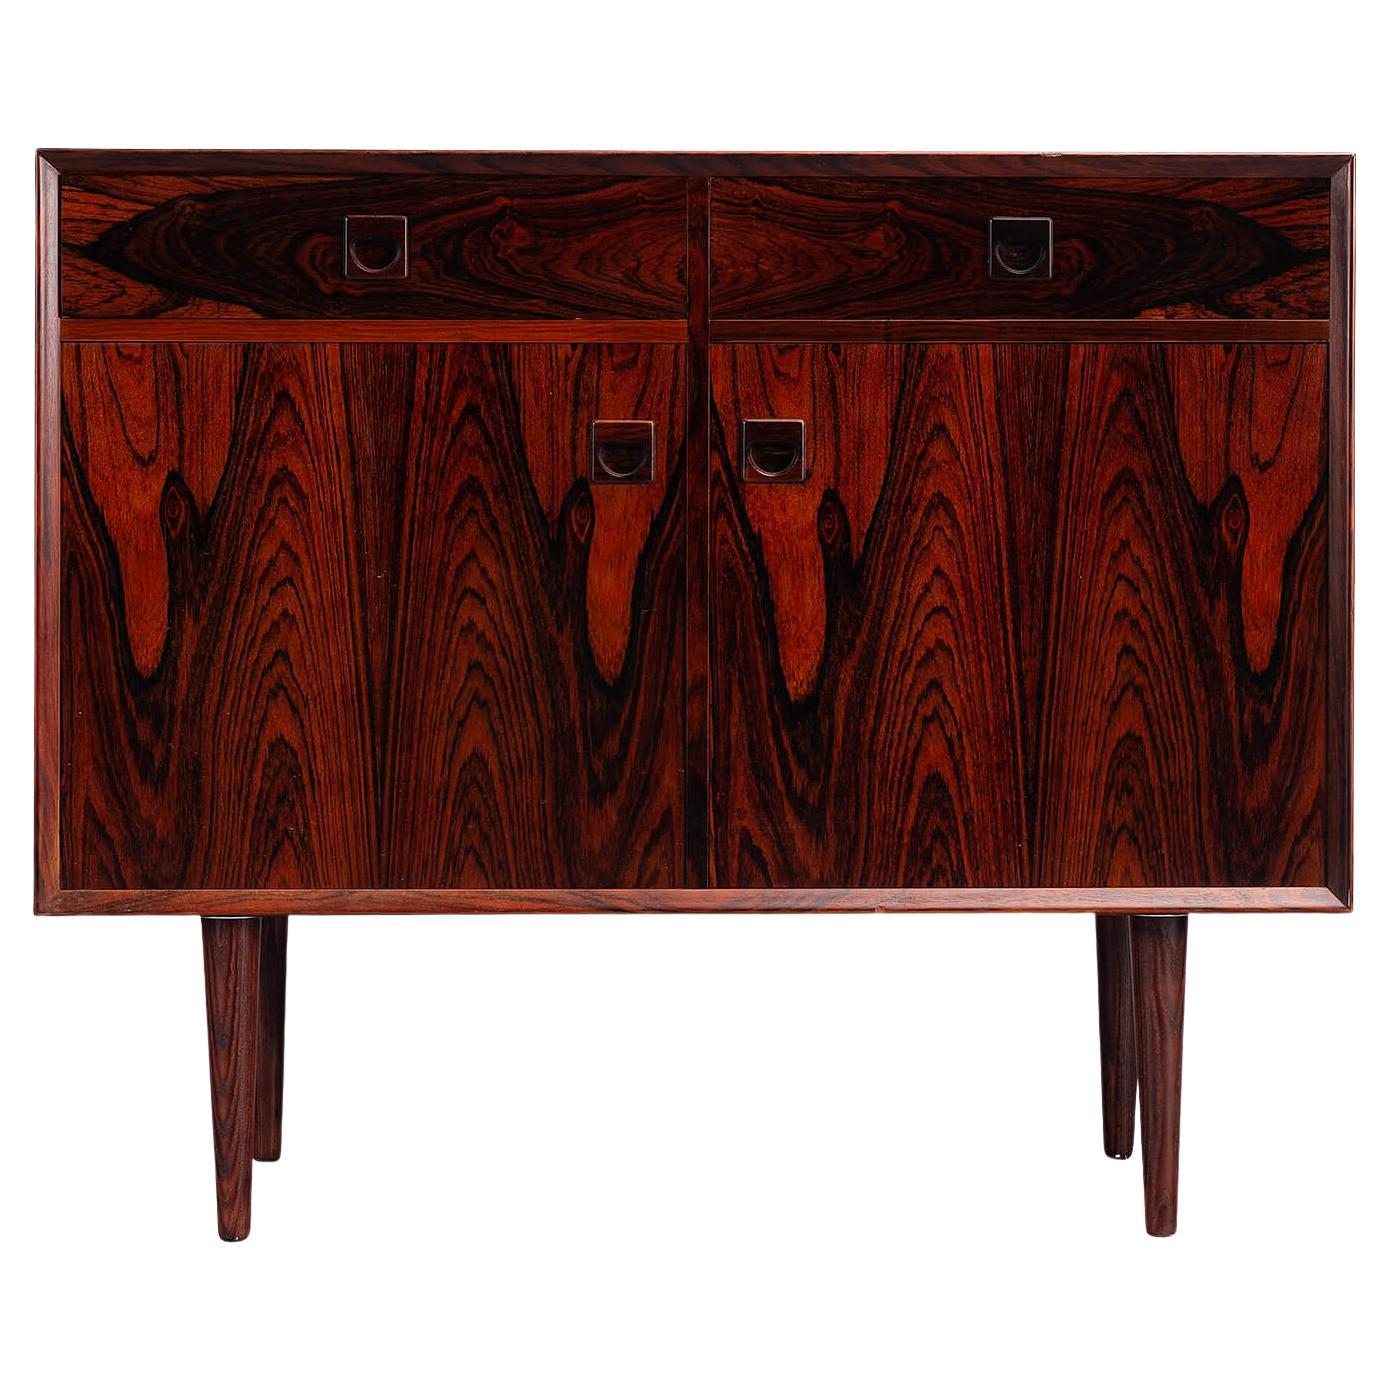 Small Midcentury Rosewood Sideboard by E. Brouer for Brouer Møbelfabrik, 1960s